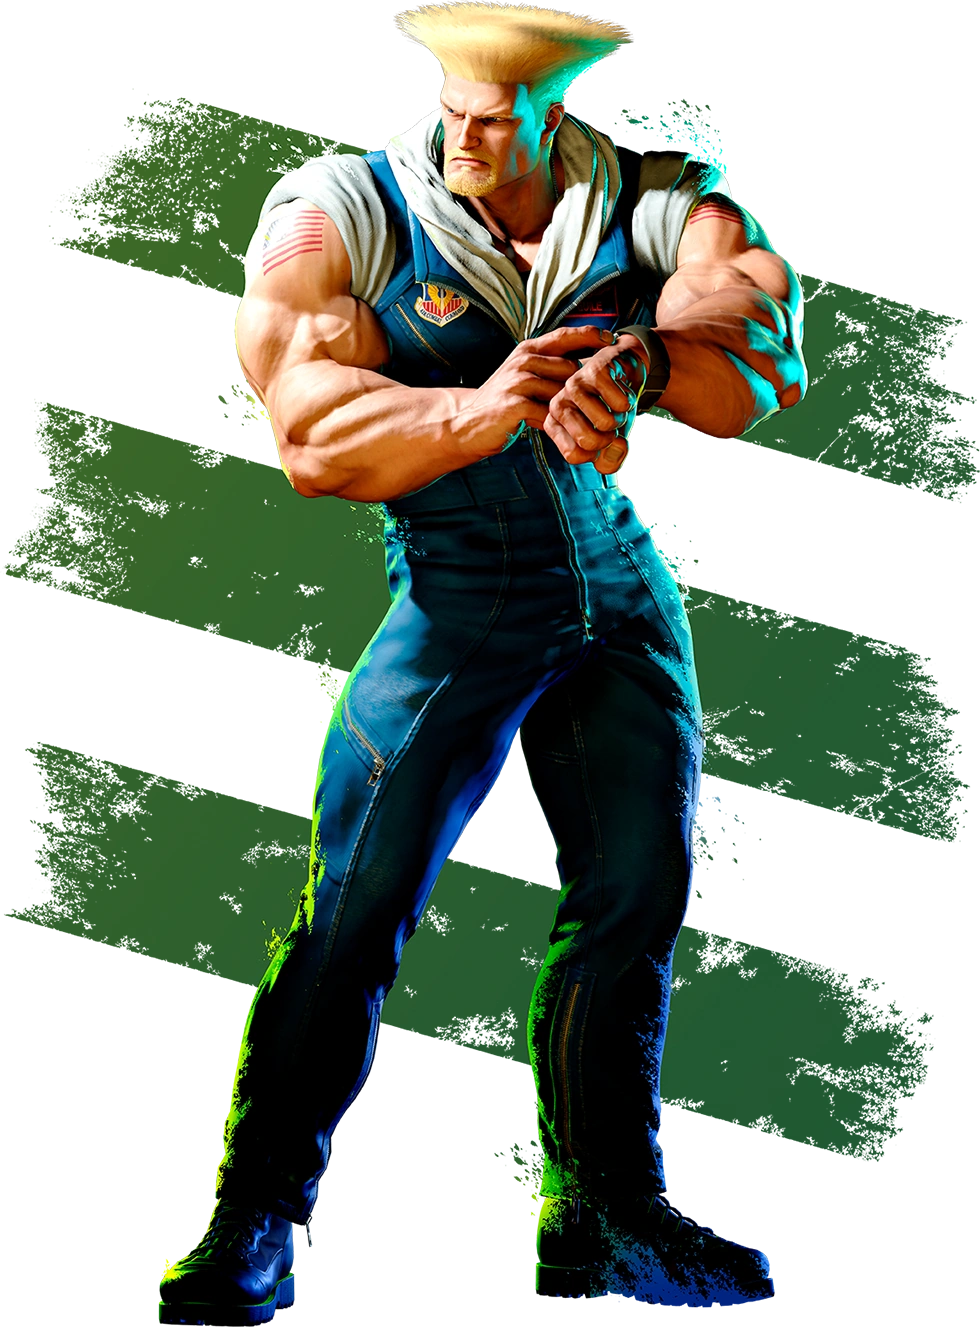 Link with Guile or M.Ryu? Guile is the highest level so tempted